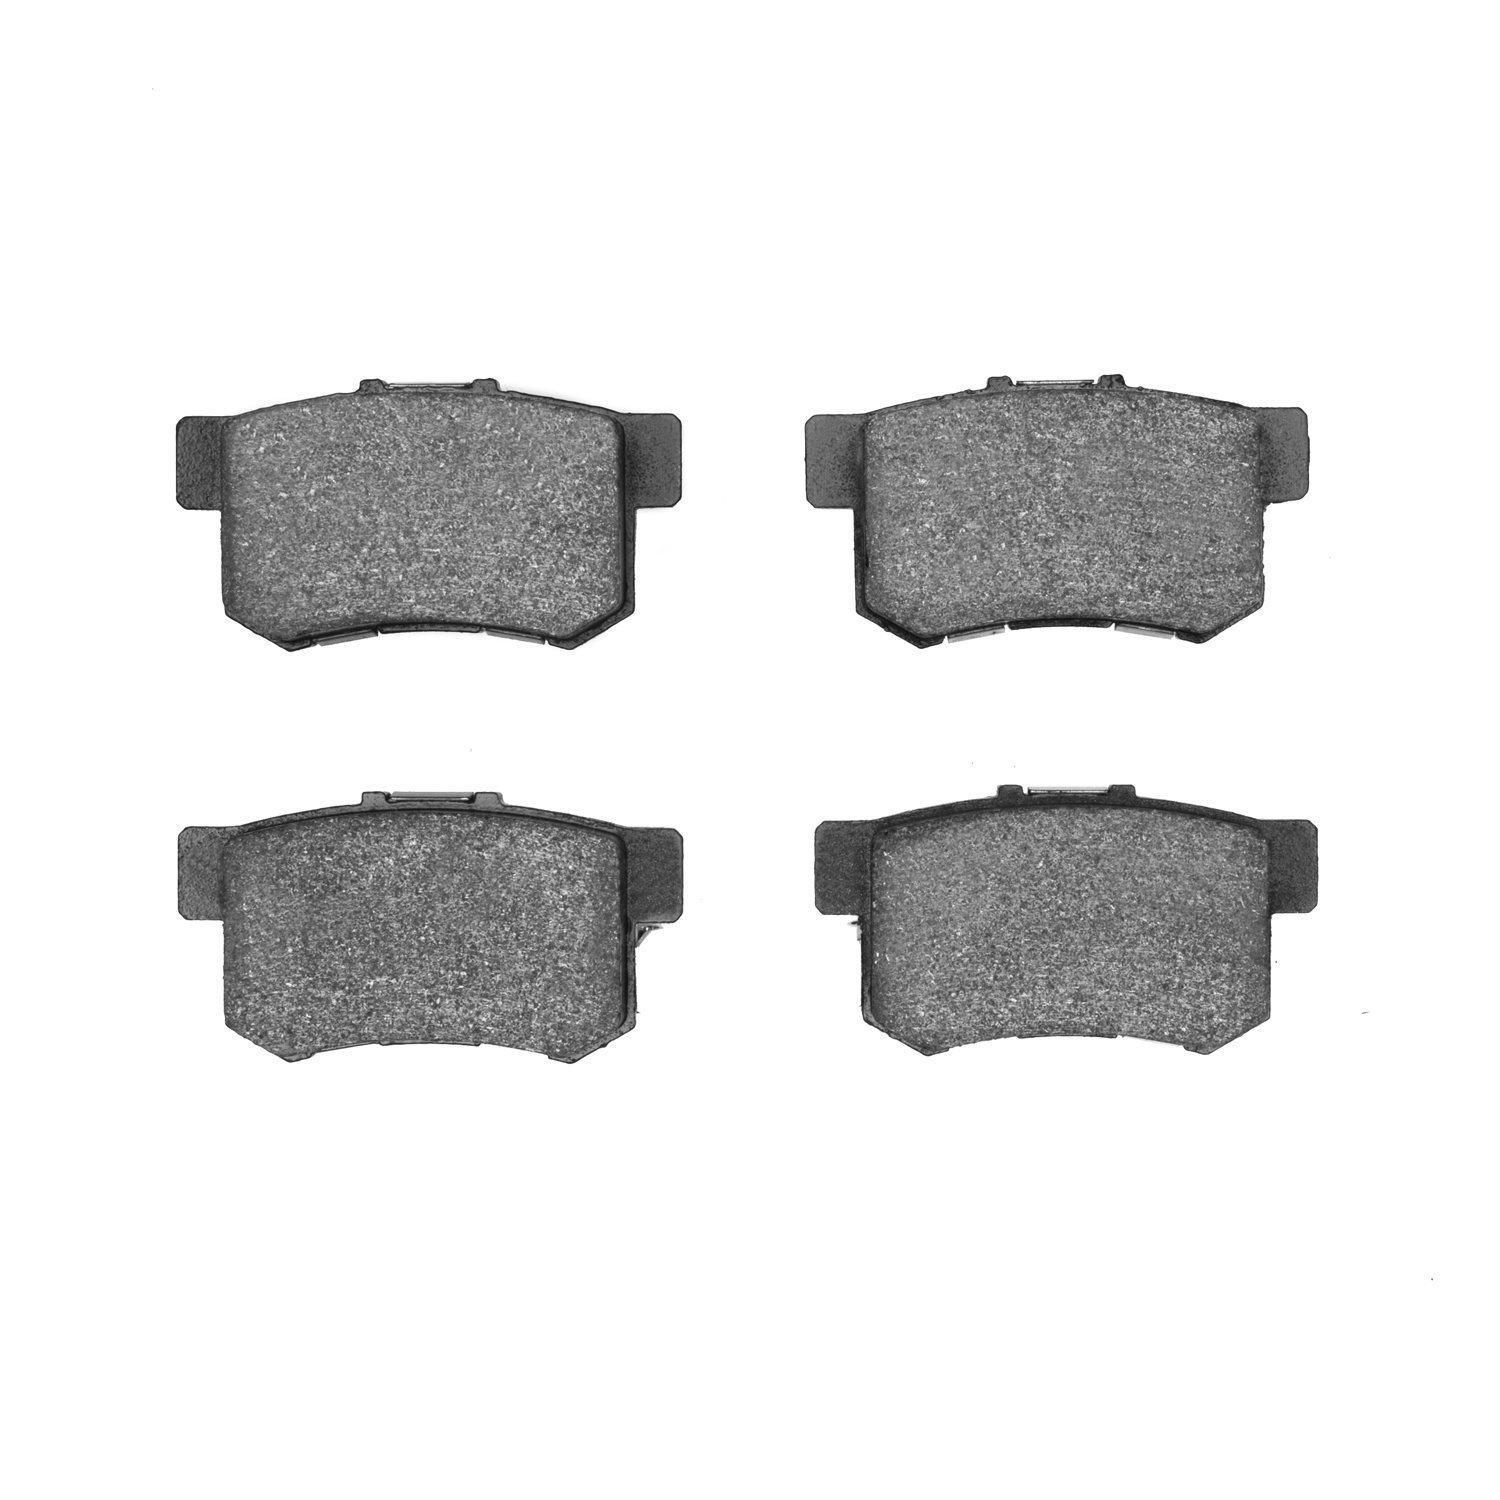 Performance Sport Brake Pads, Fits Select Fits Multiple Makes/Models, Position: Rear